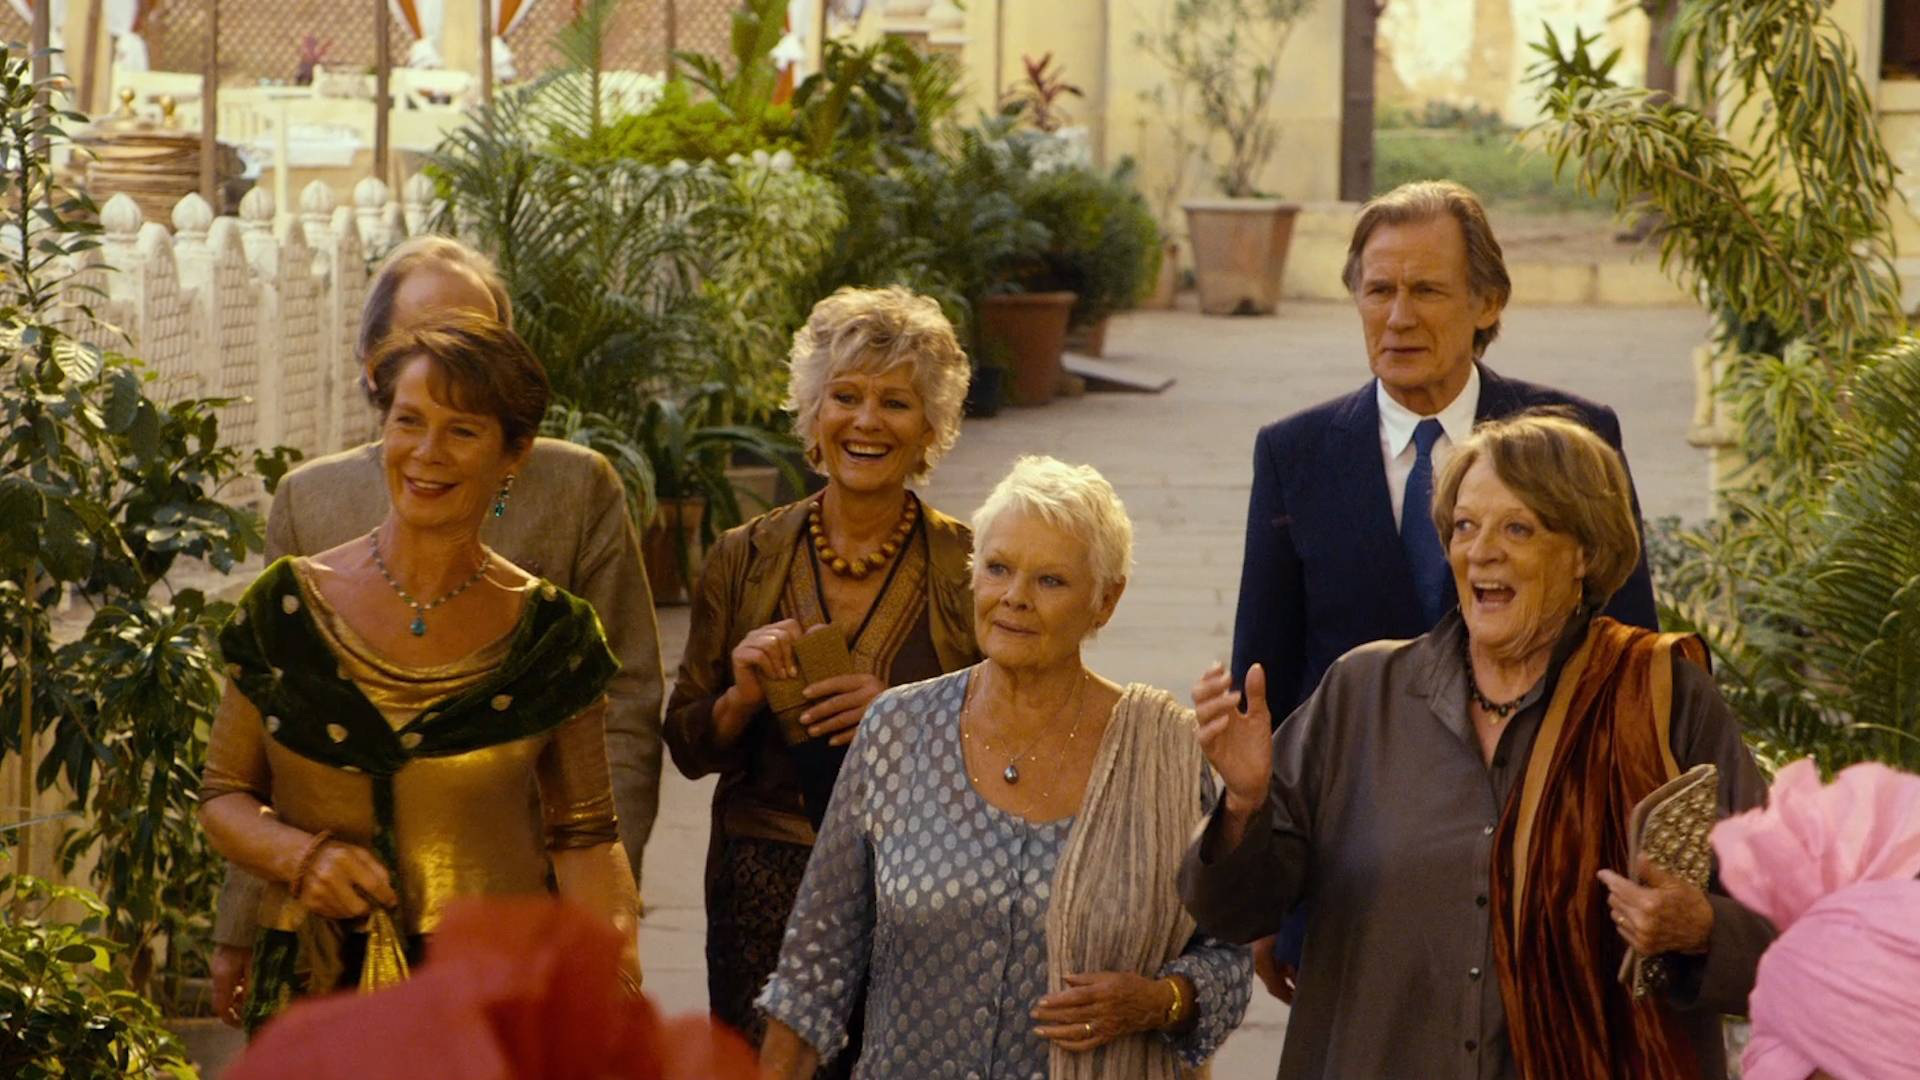 HD Quality Wallpaper | Collection: Movie, 1920x1080 The Second Best Exotic Marigold Hotel